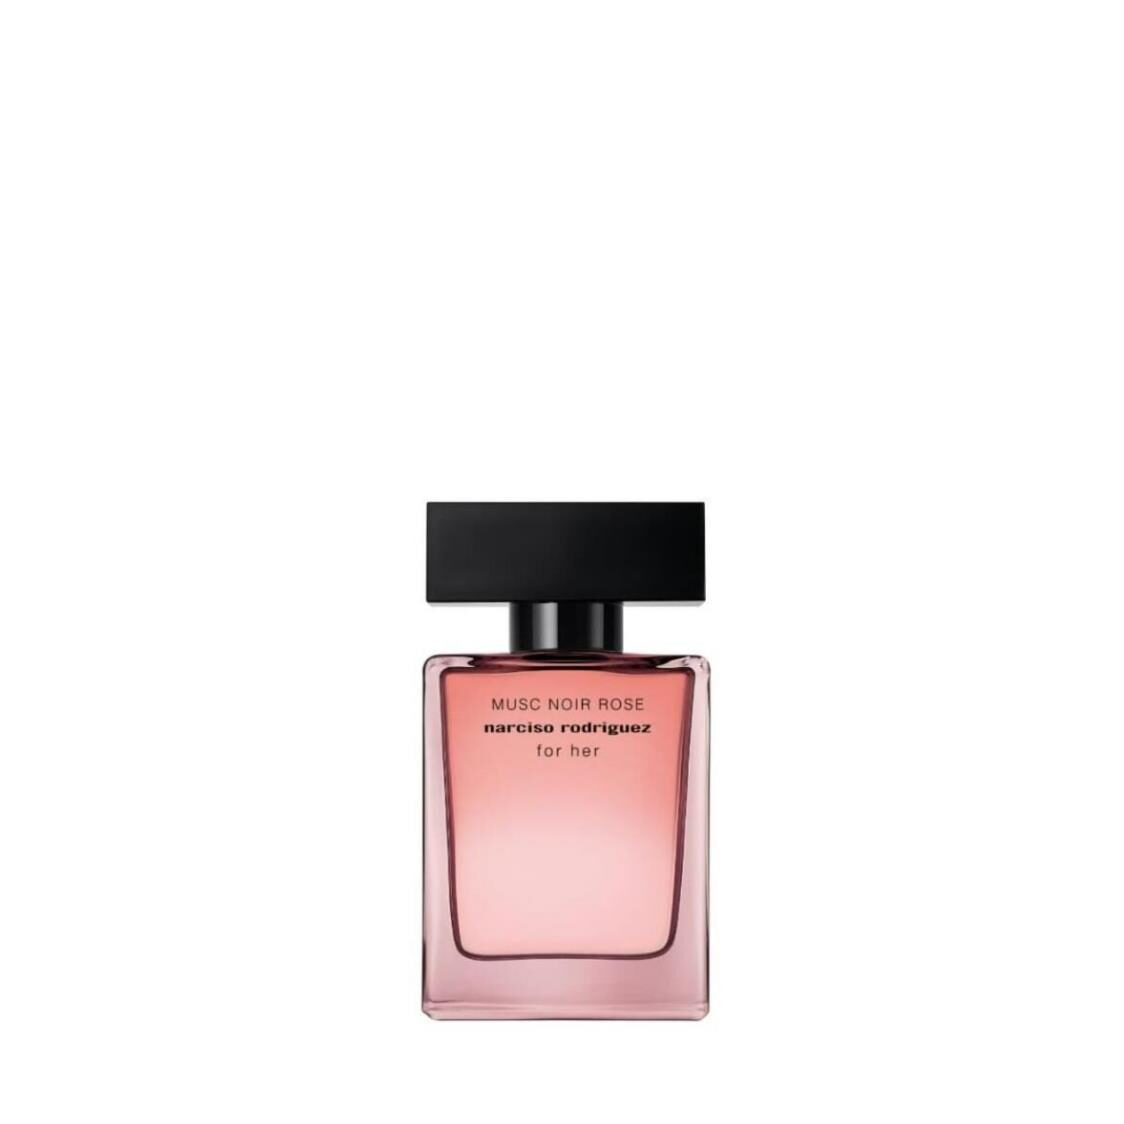 Narciso Rodrioguez for Her Musc Noir Rose EDP